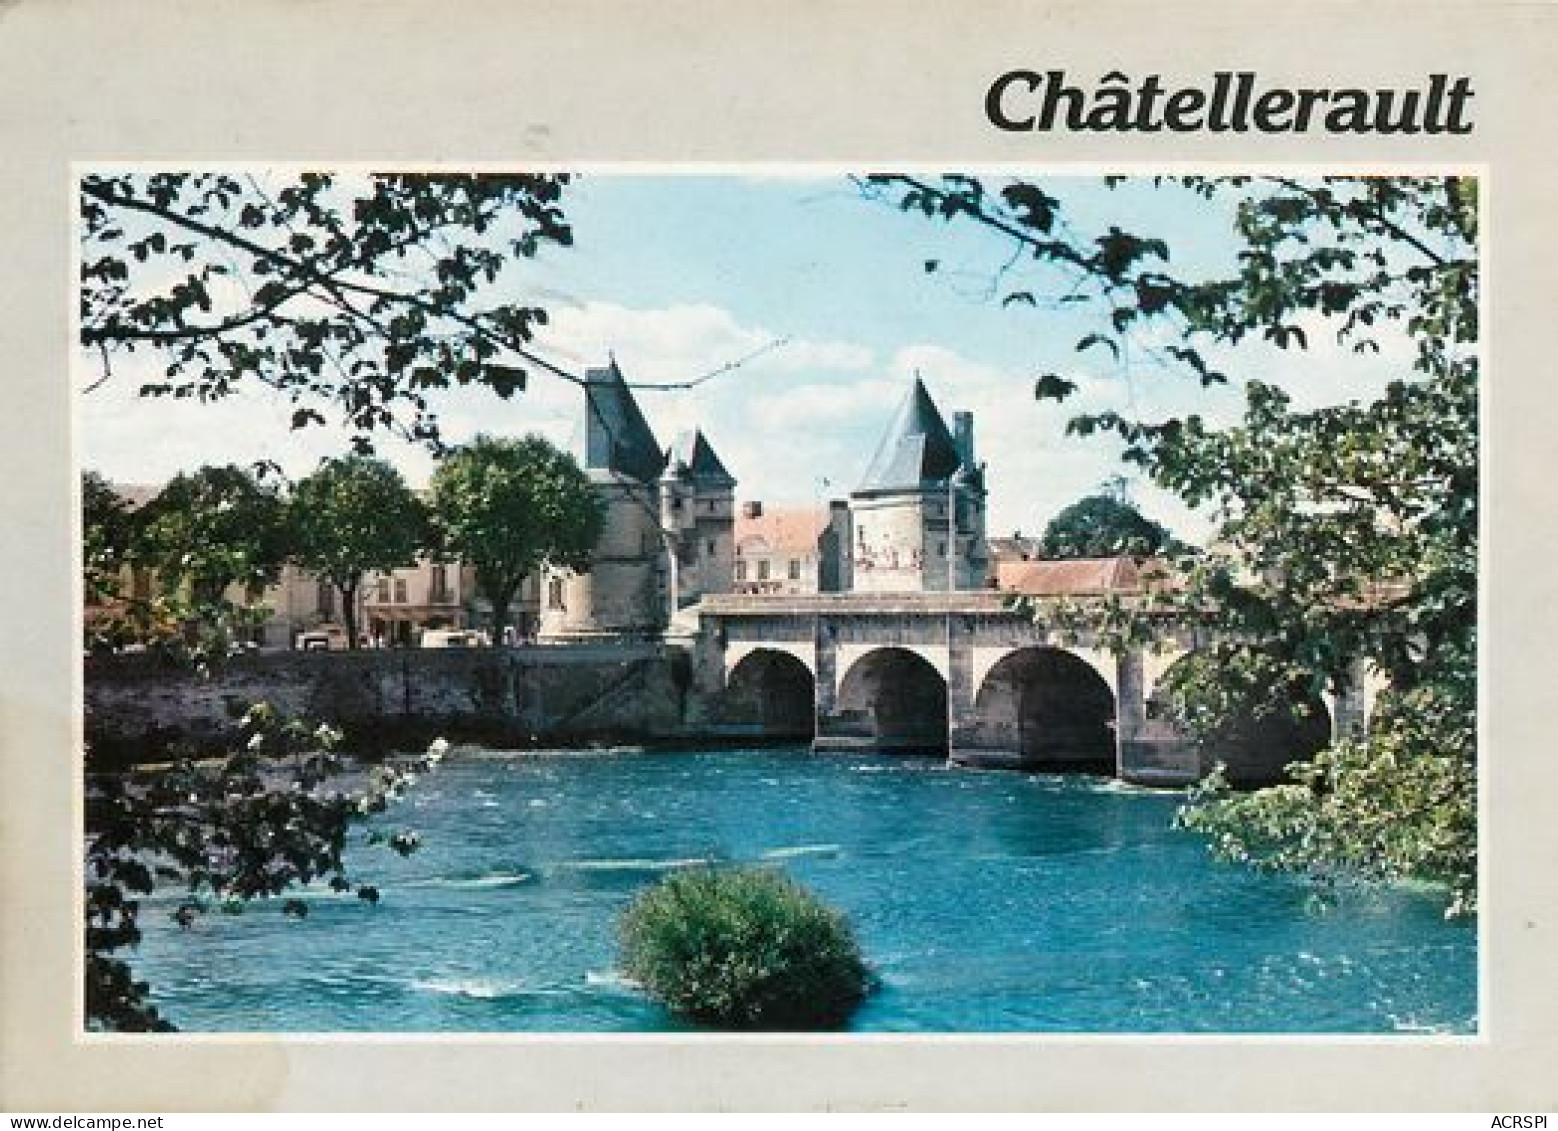 Châtellerault  Le Pont Henri IV  12   (scan Recto-verso)MA2272Ter - Chatellerault